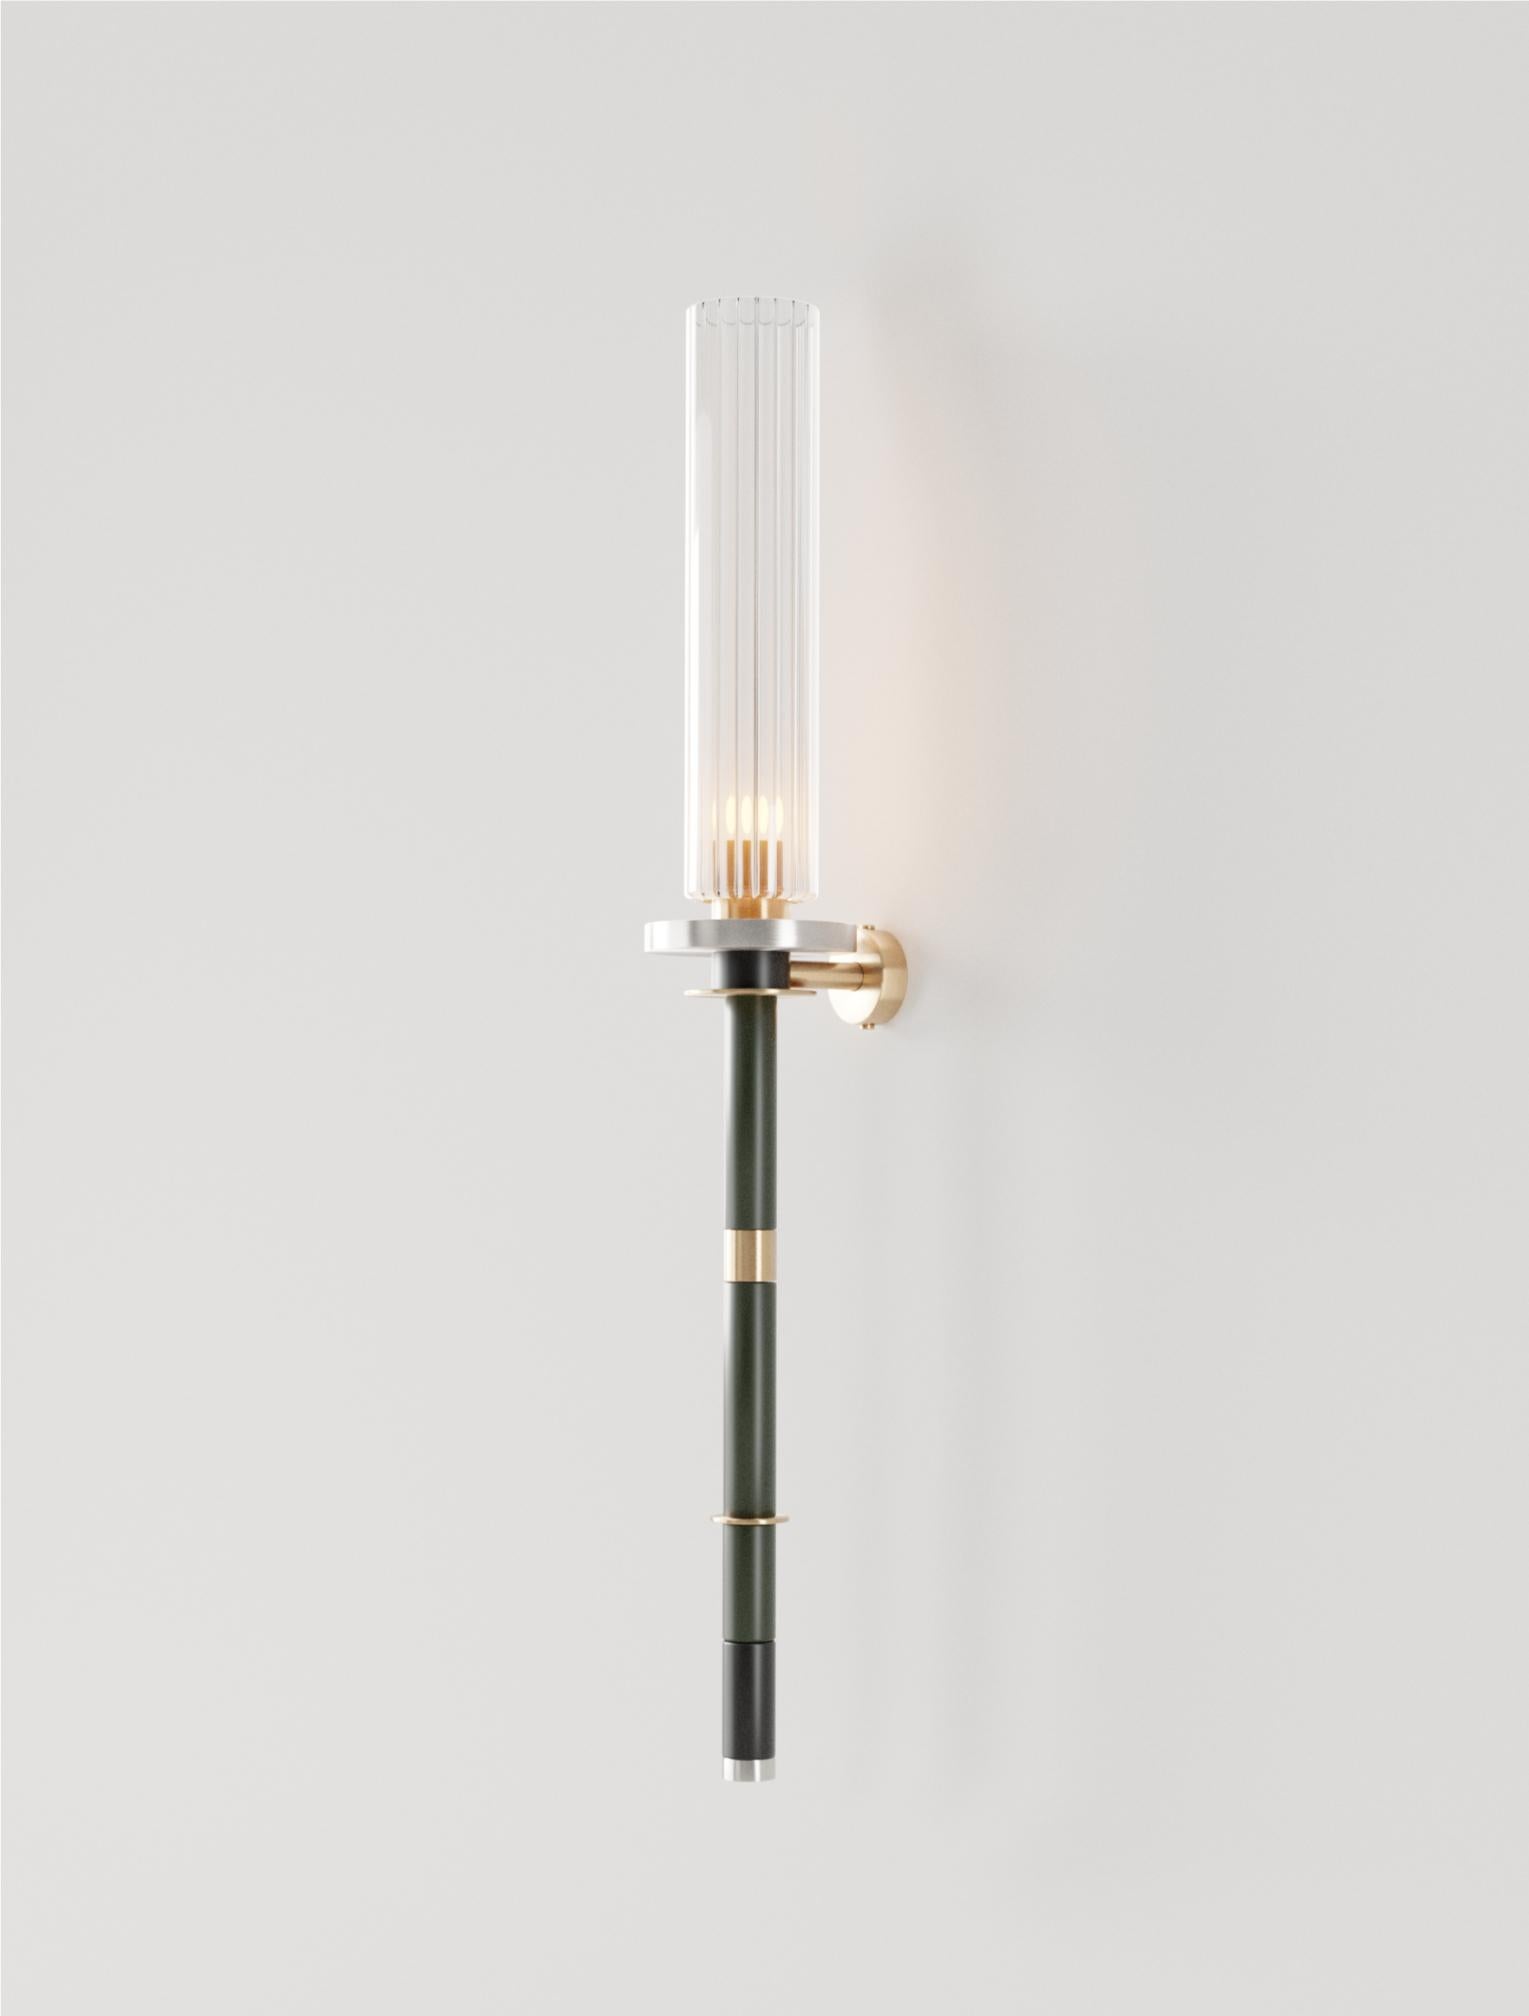 21st C Contemporary Marine Breynaert Wall Sconce Lamp Brushed Brass Glass Green In New Condition For Sale In Paris, FR